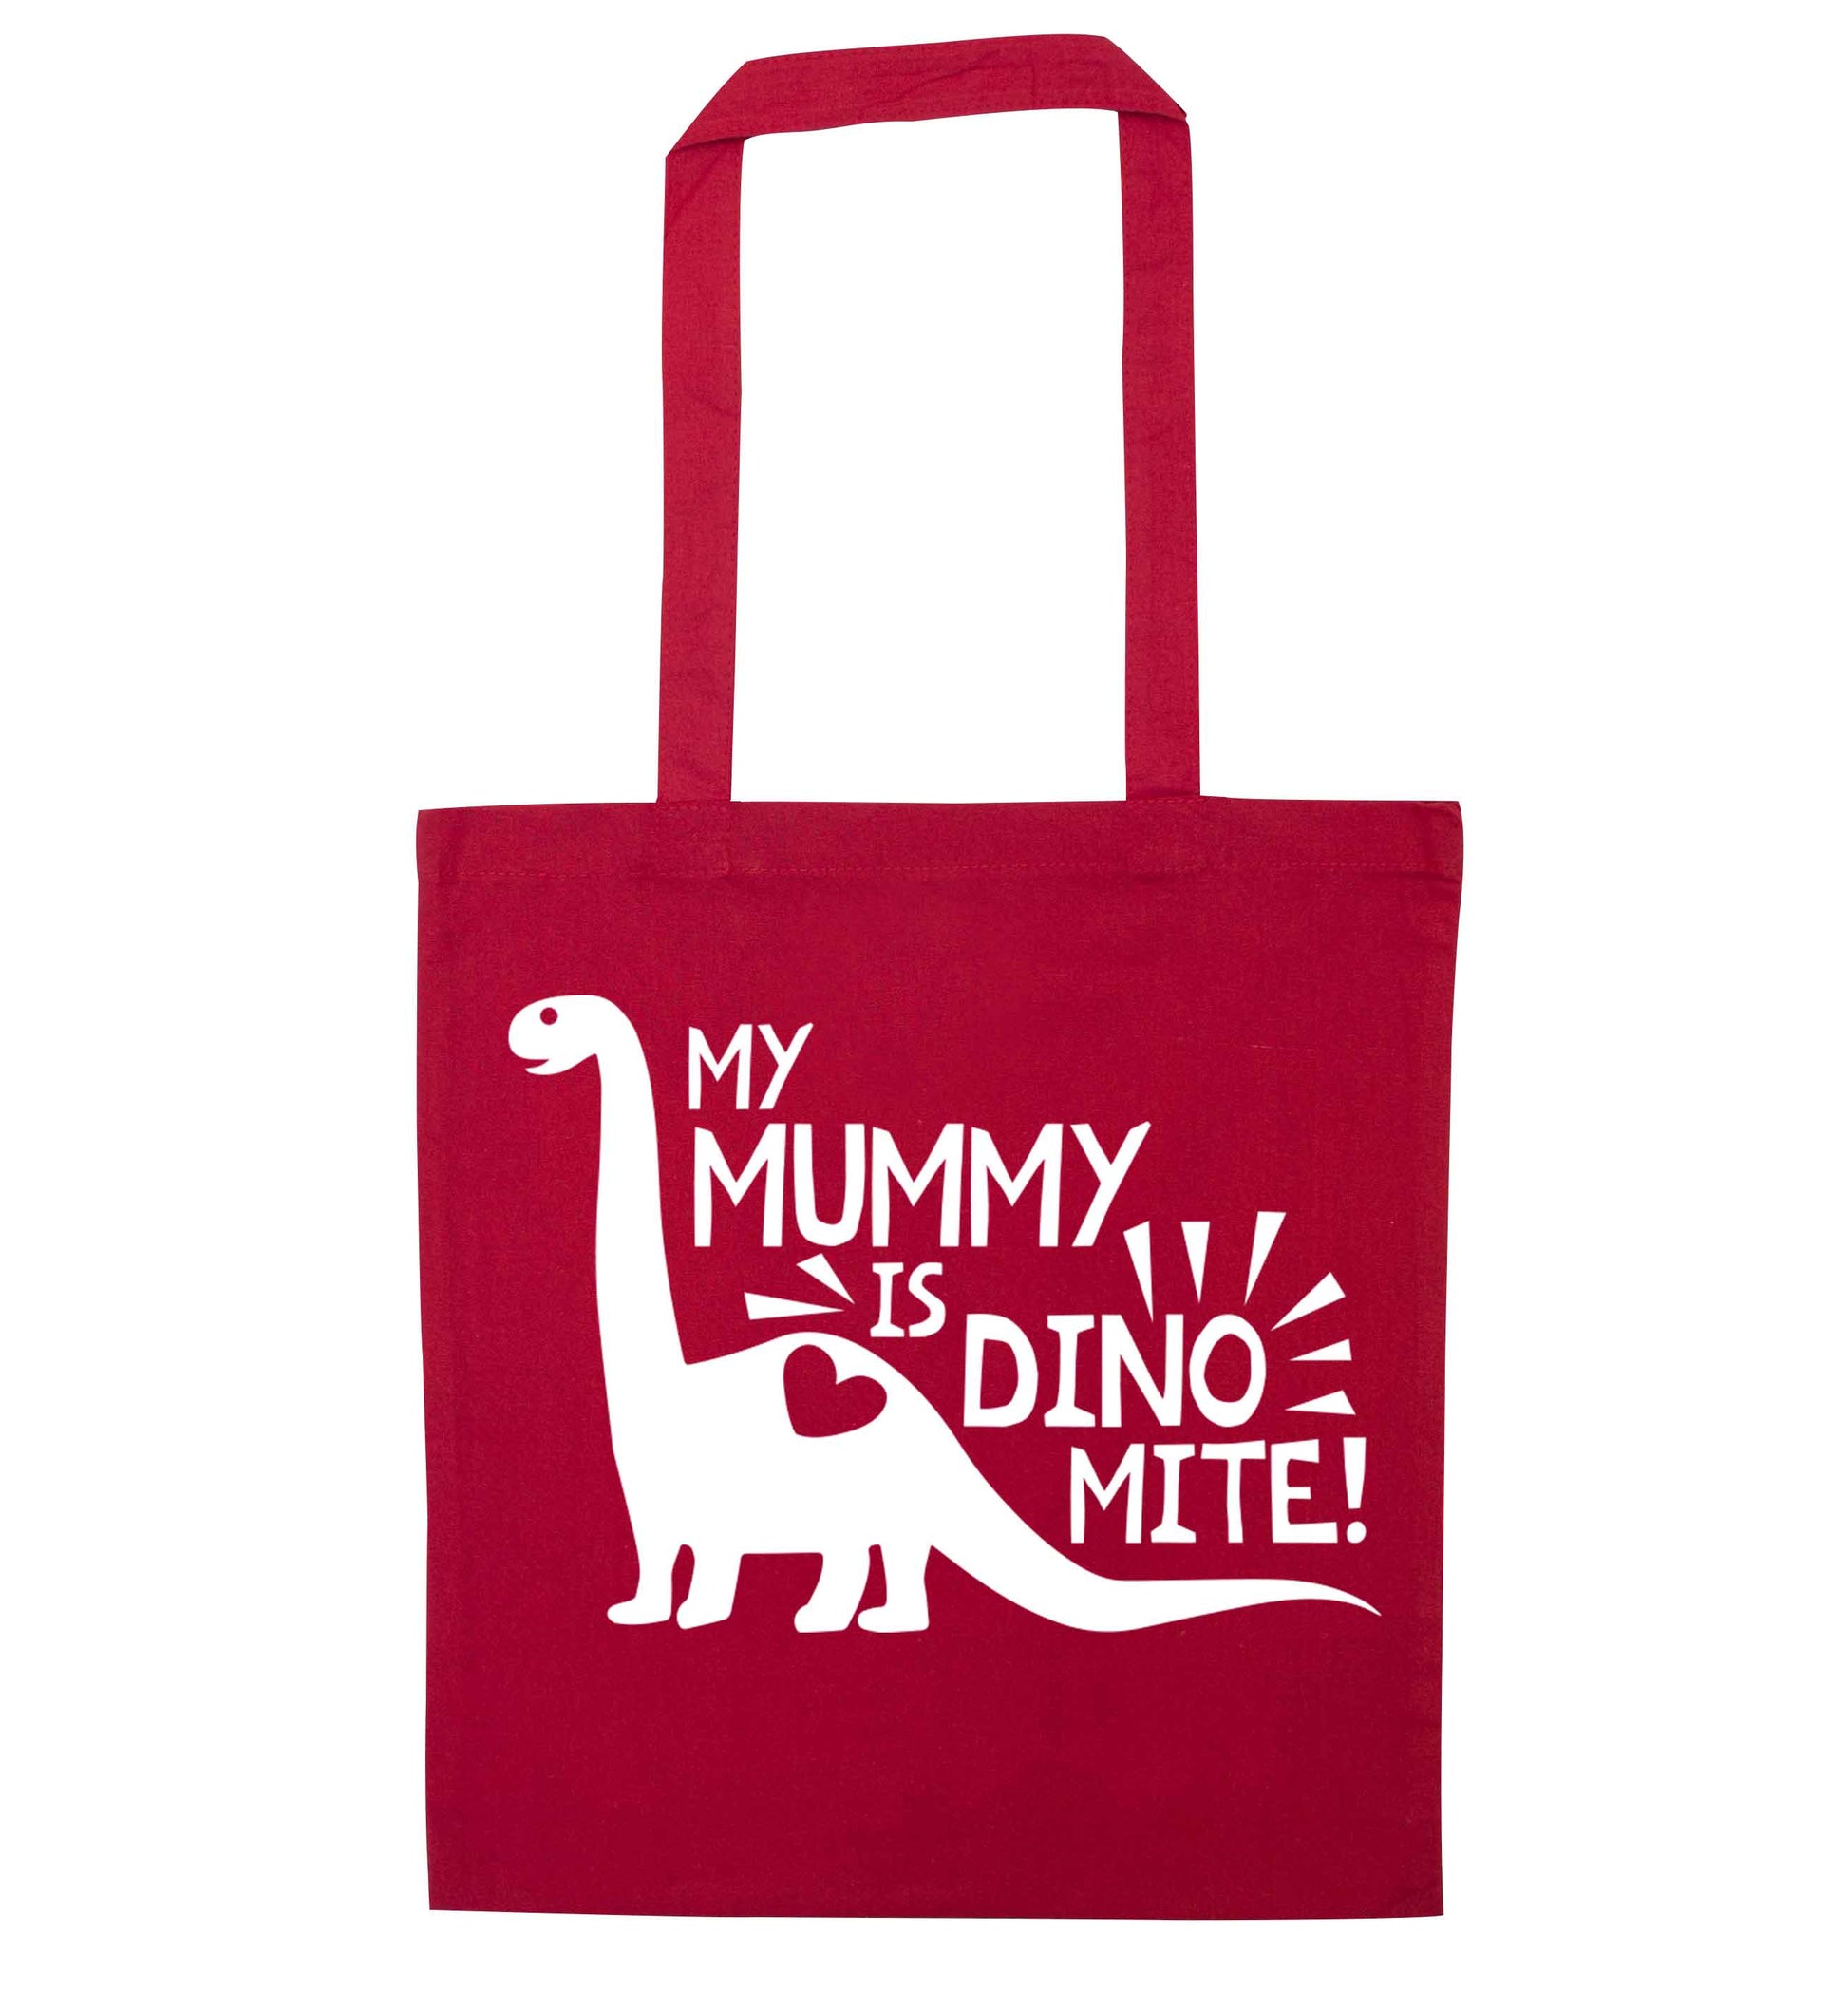 My mummy is dinomite red tote bag